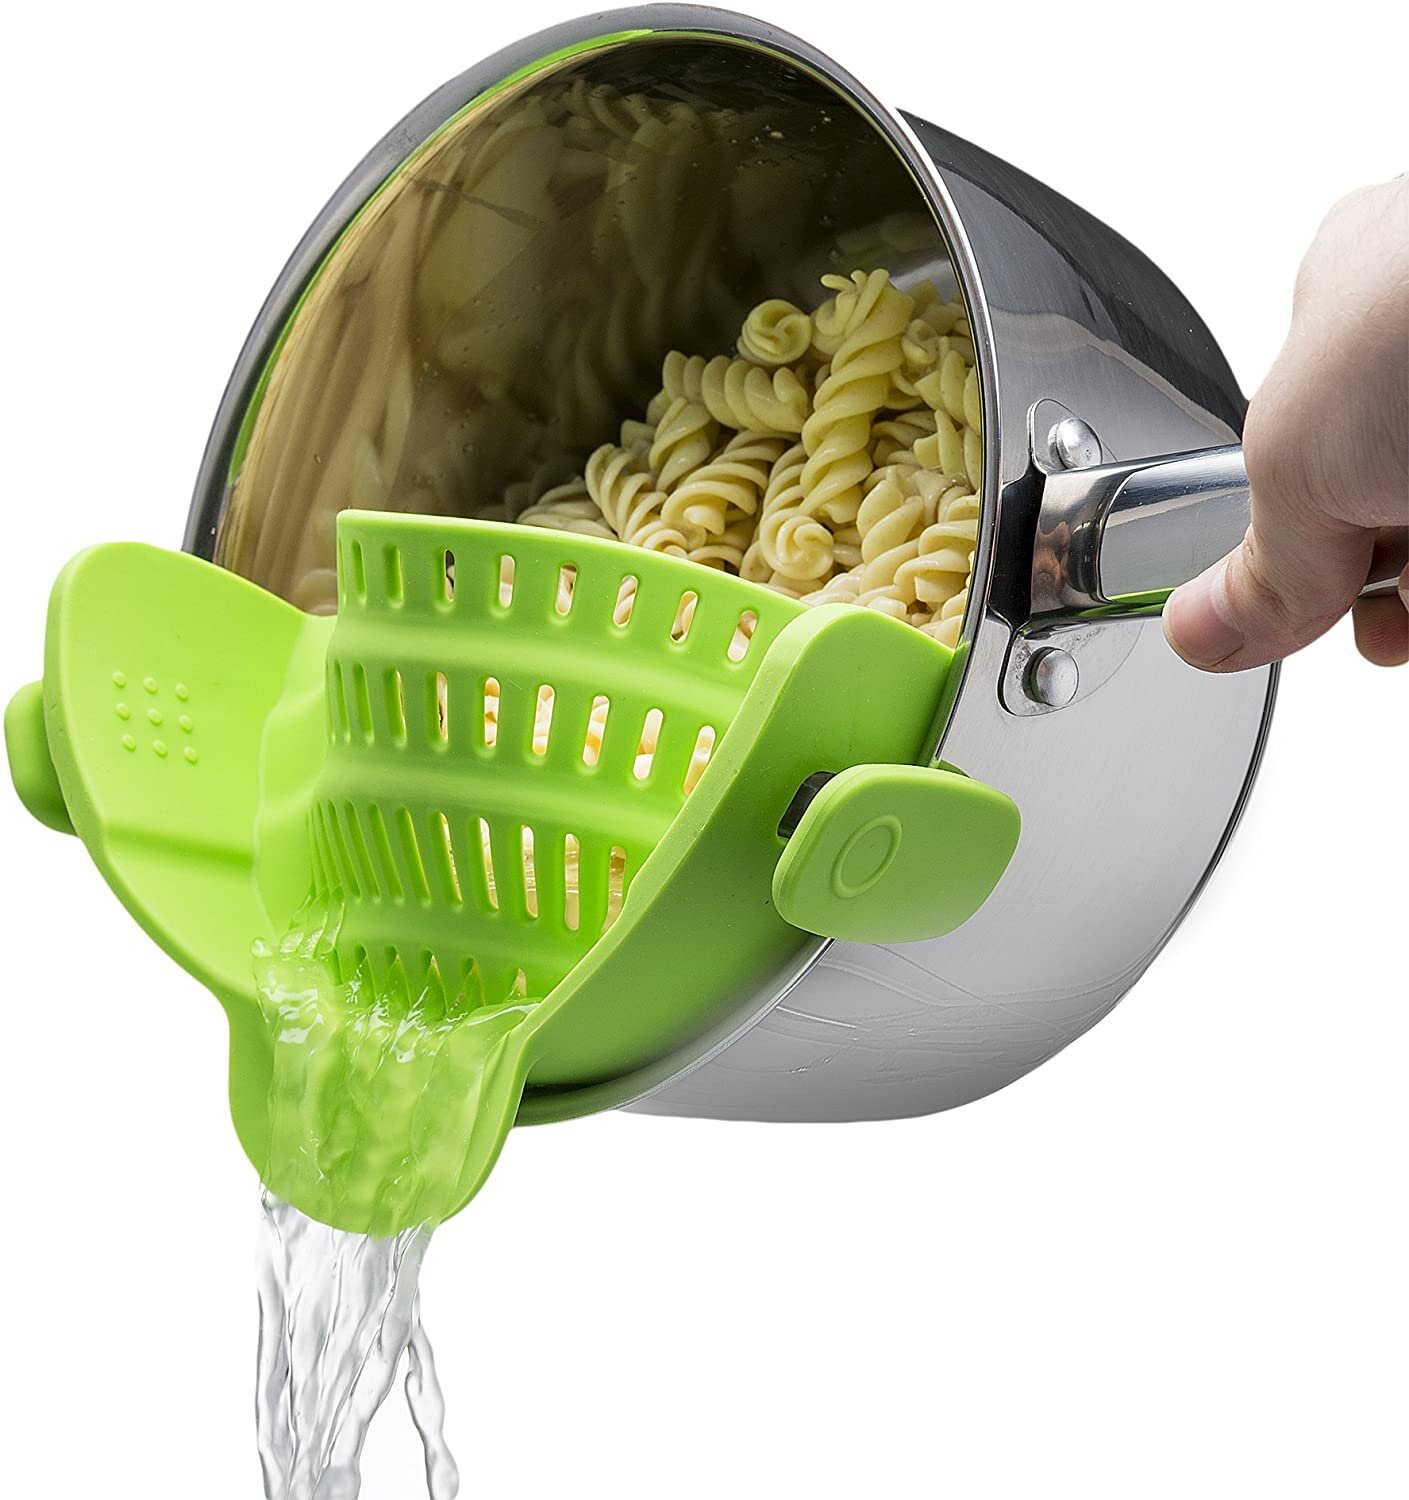 5 Kitchen Gadgets For Under A Fiver - ILoveCooking